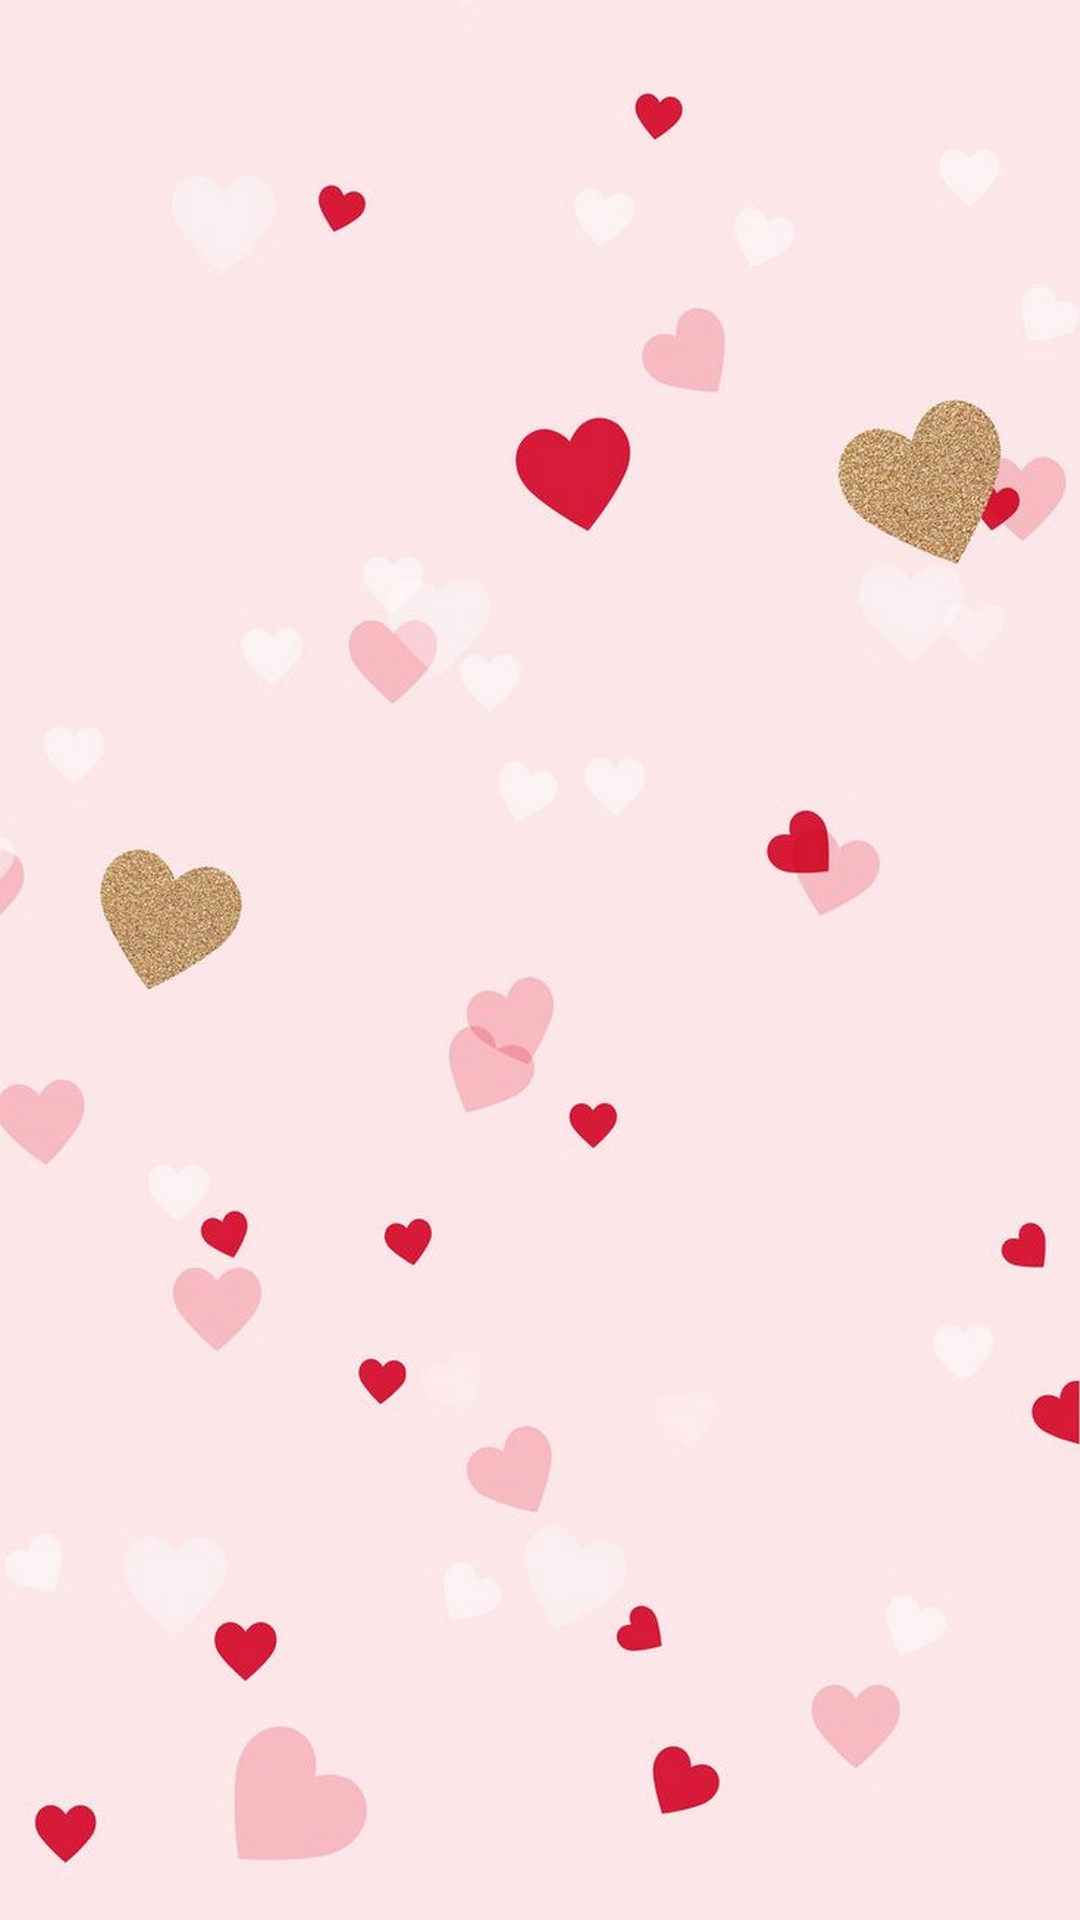 Valentines Day Cards For Android with HD resolution 1080x1920